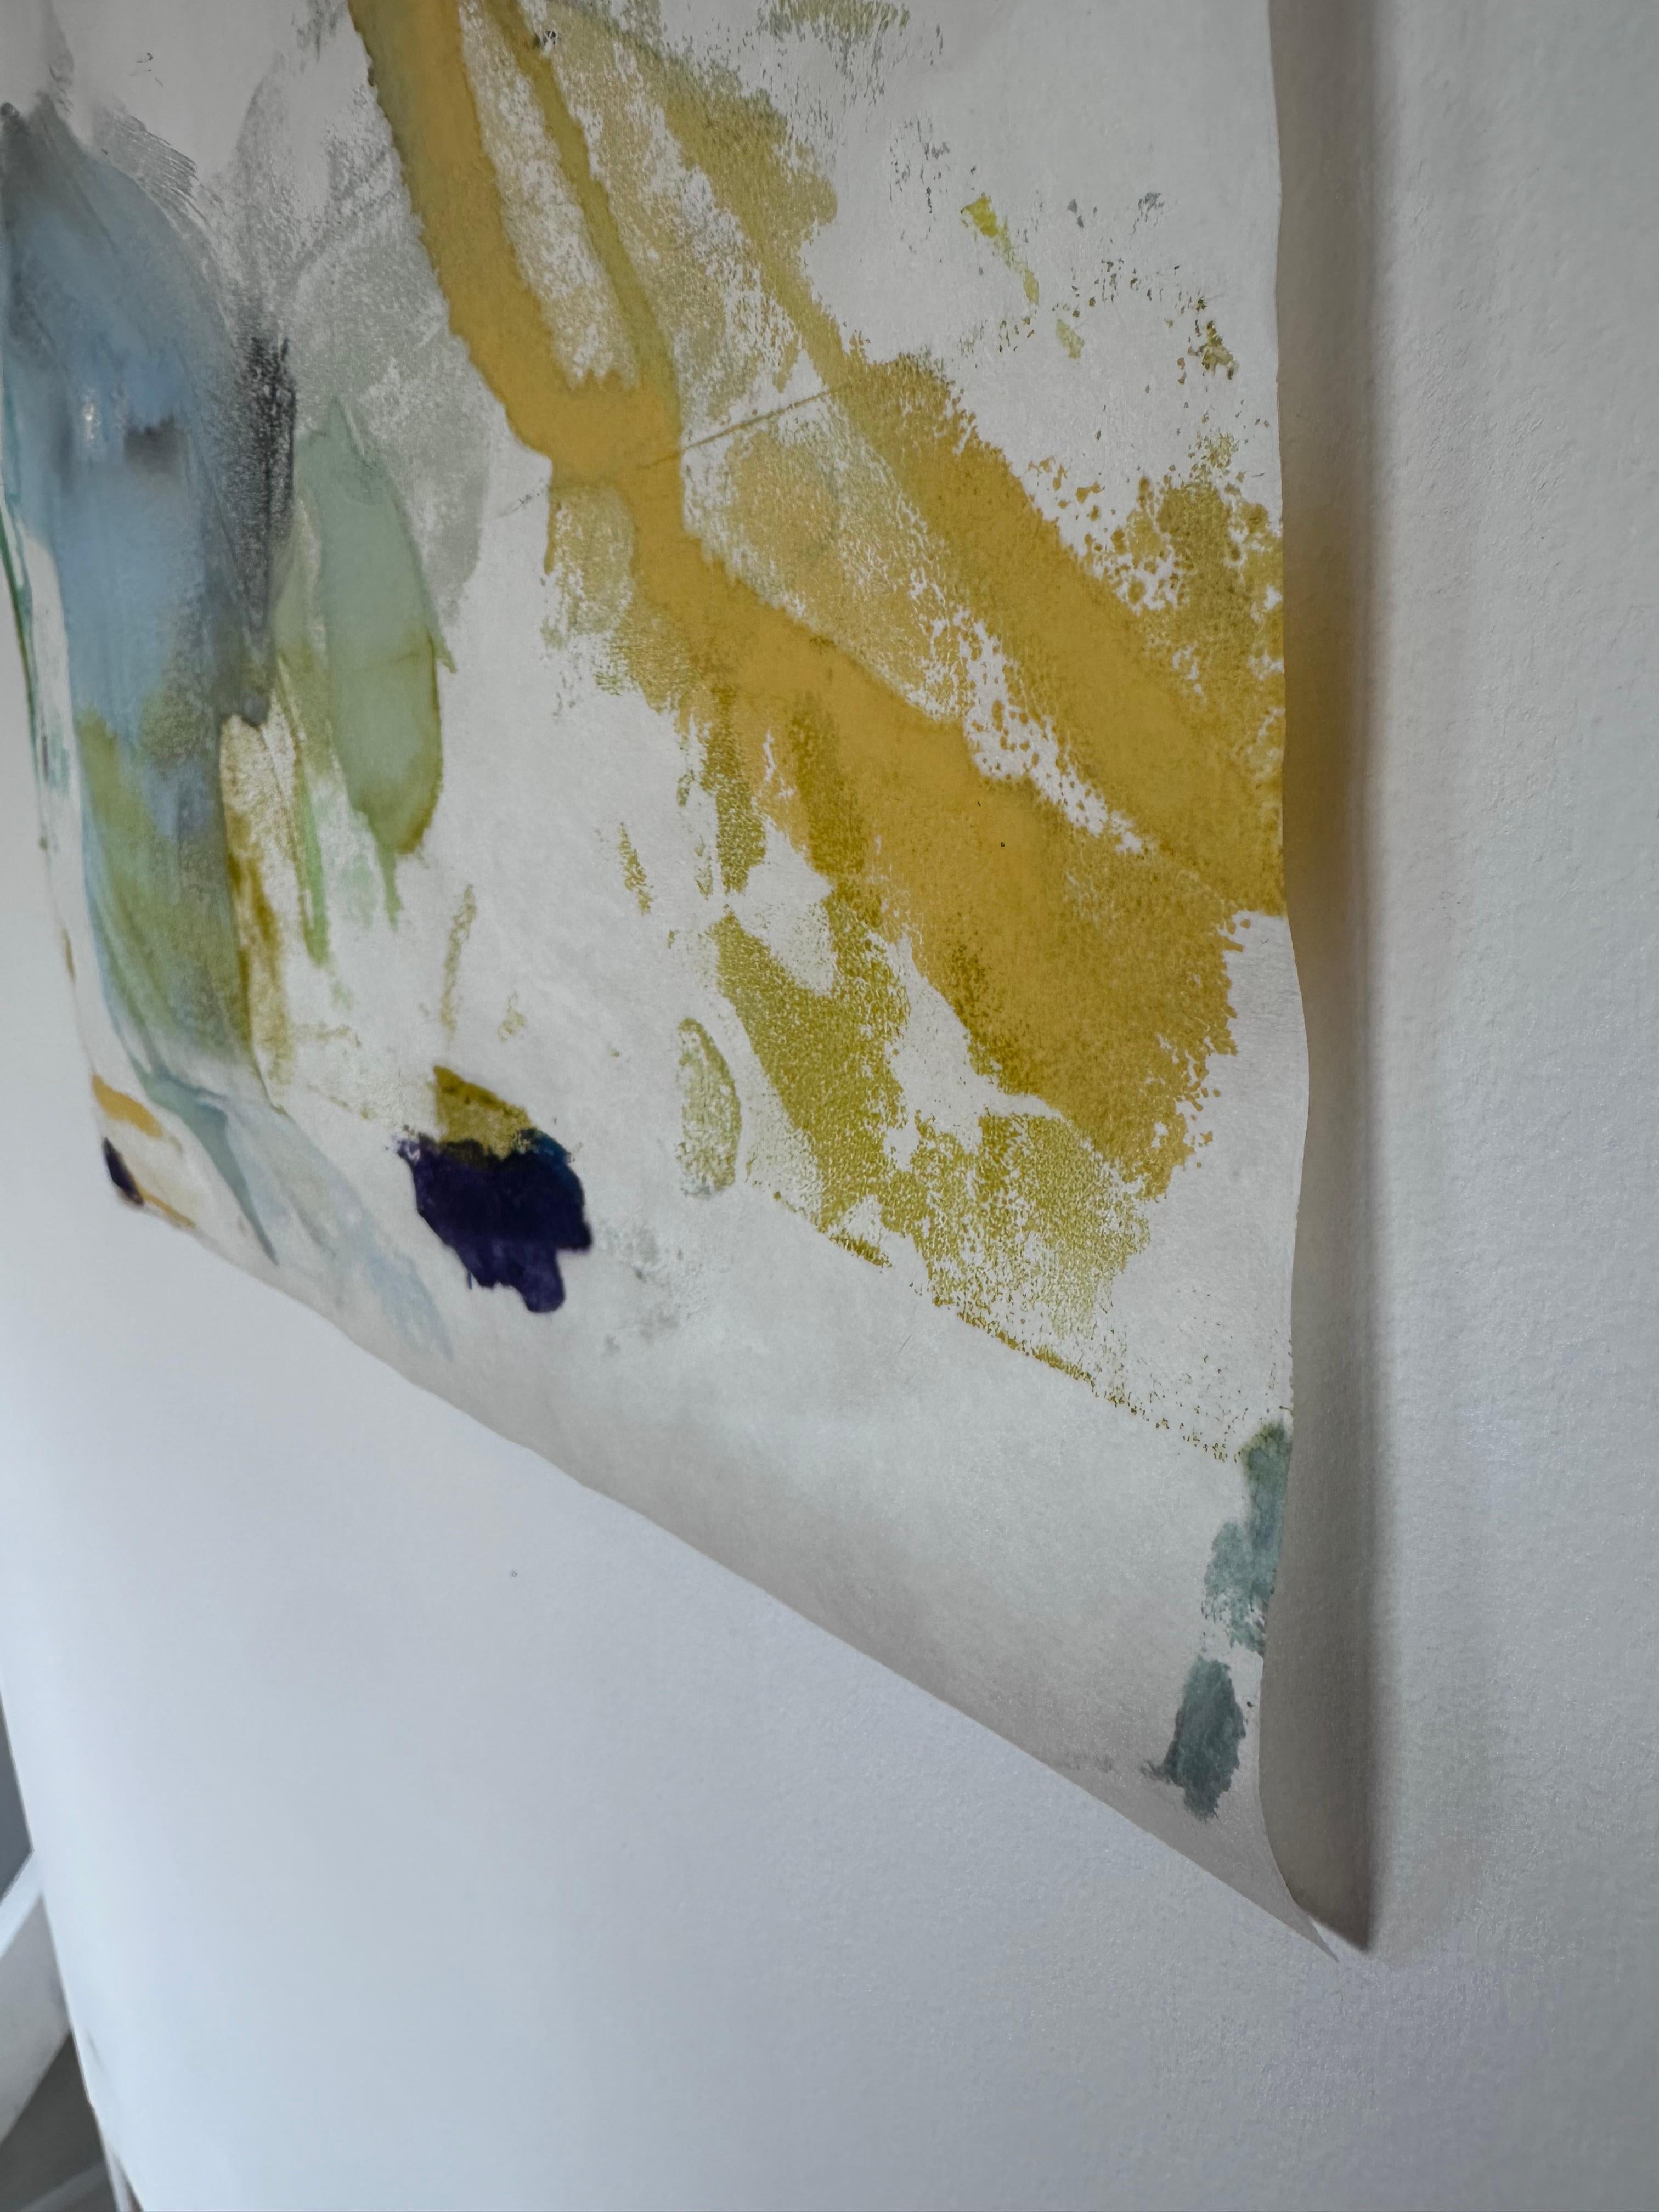 In Dreams Drift Deep color, line, shape, and texture collide on Kozuke ivory paper. This one-of-a-kind, unmounted encaustic monotype illuminates a poetic interior landscape. The softness of the washi paper juxtaposed with the lush, textured